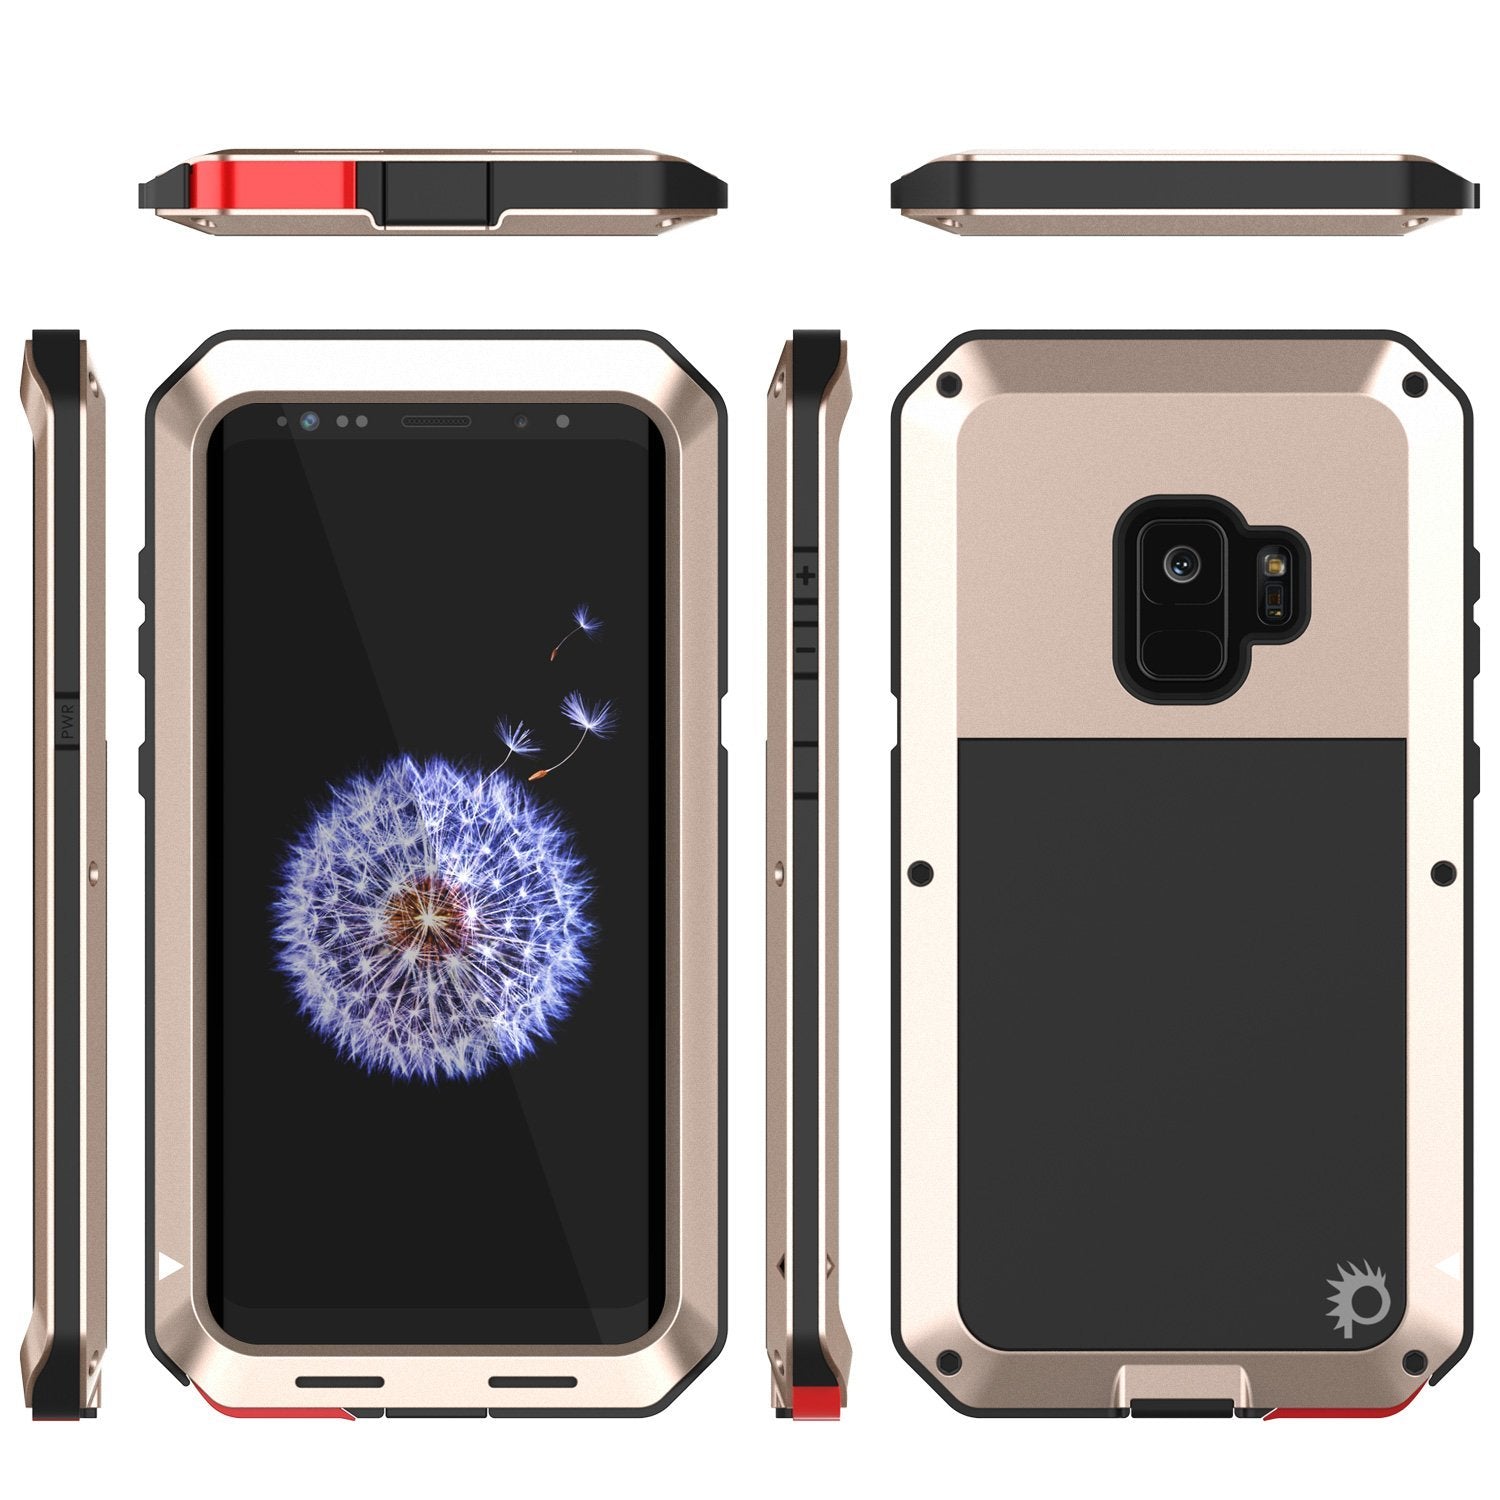 Galaxy S10 Metal Case, Heavy Duty Military Grade Rugged Armor Cover [Gold]